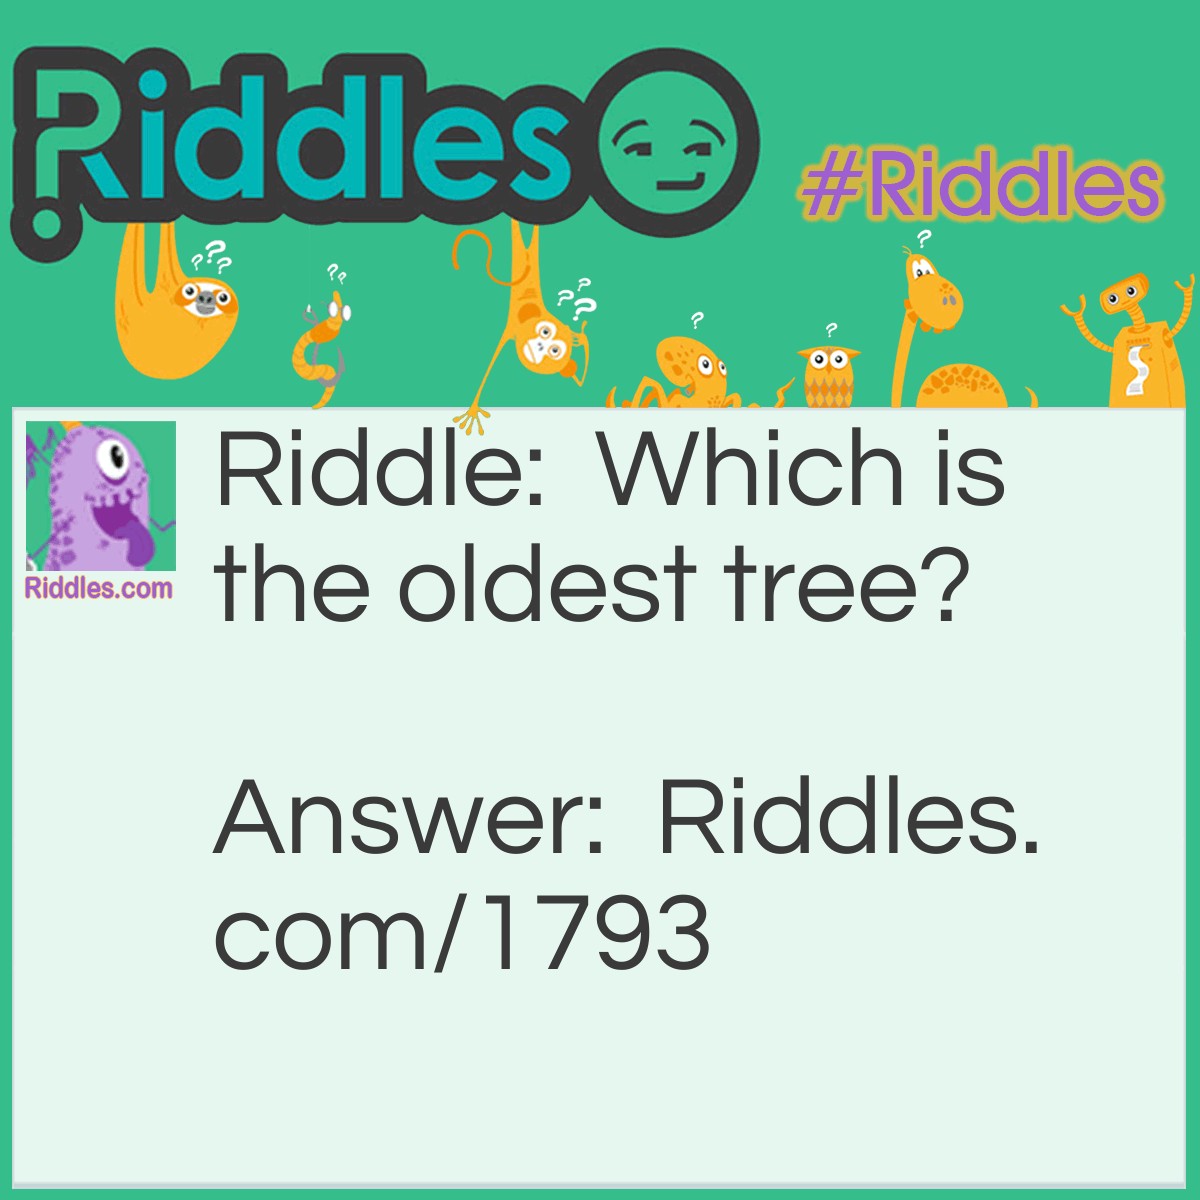 Riddle: Which is the oldest tree? Answer: The elder.